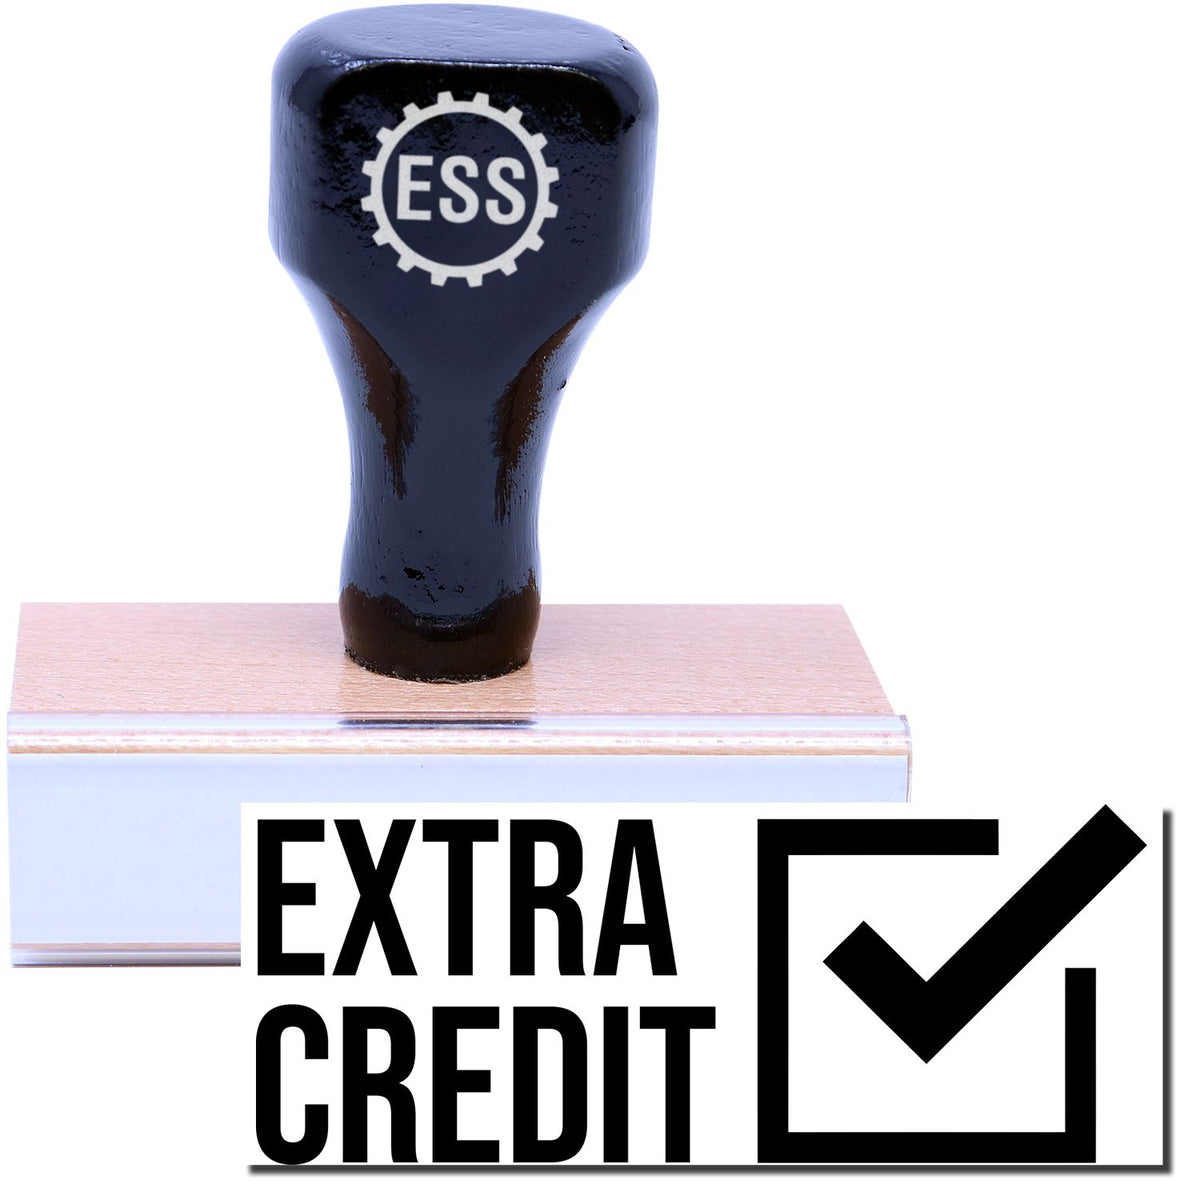 A stock office rubber stamp with a stamped image showing how the text &quot;EXTRA CREDIT&quot; in bold font with a checked box on the right is displayed after stamping.